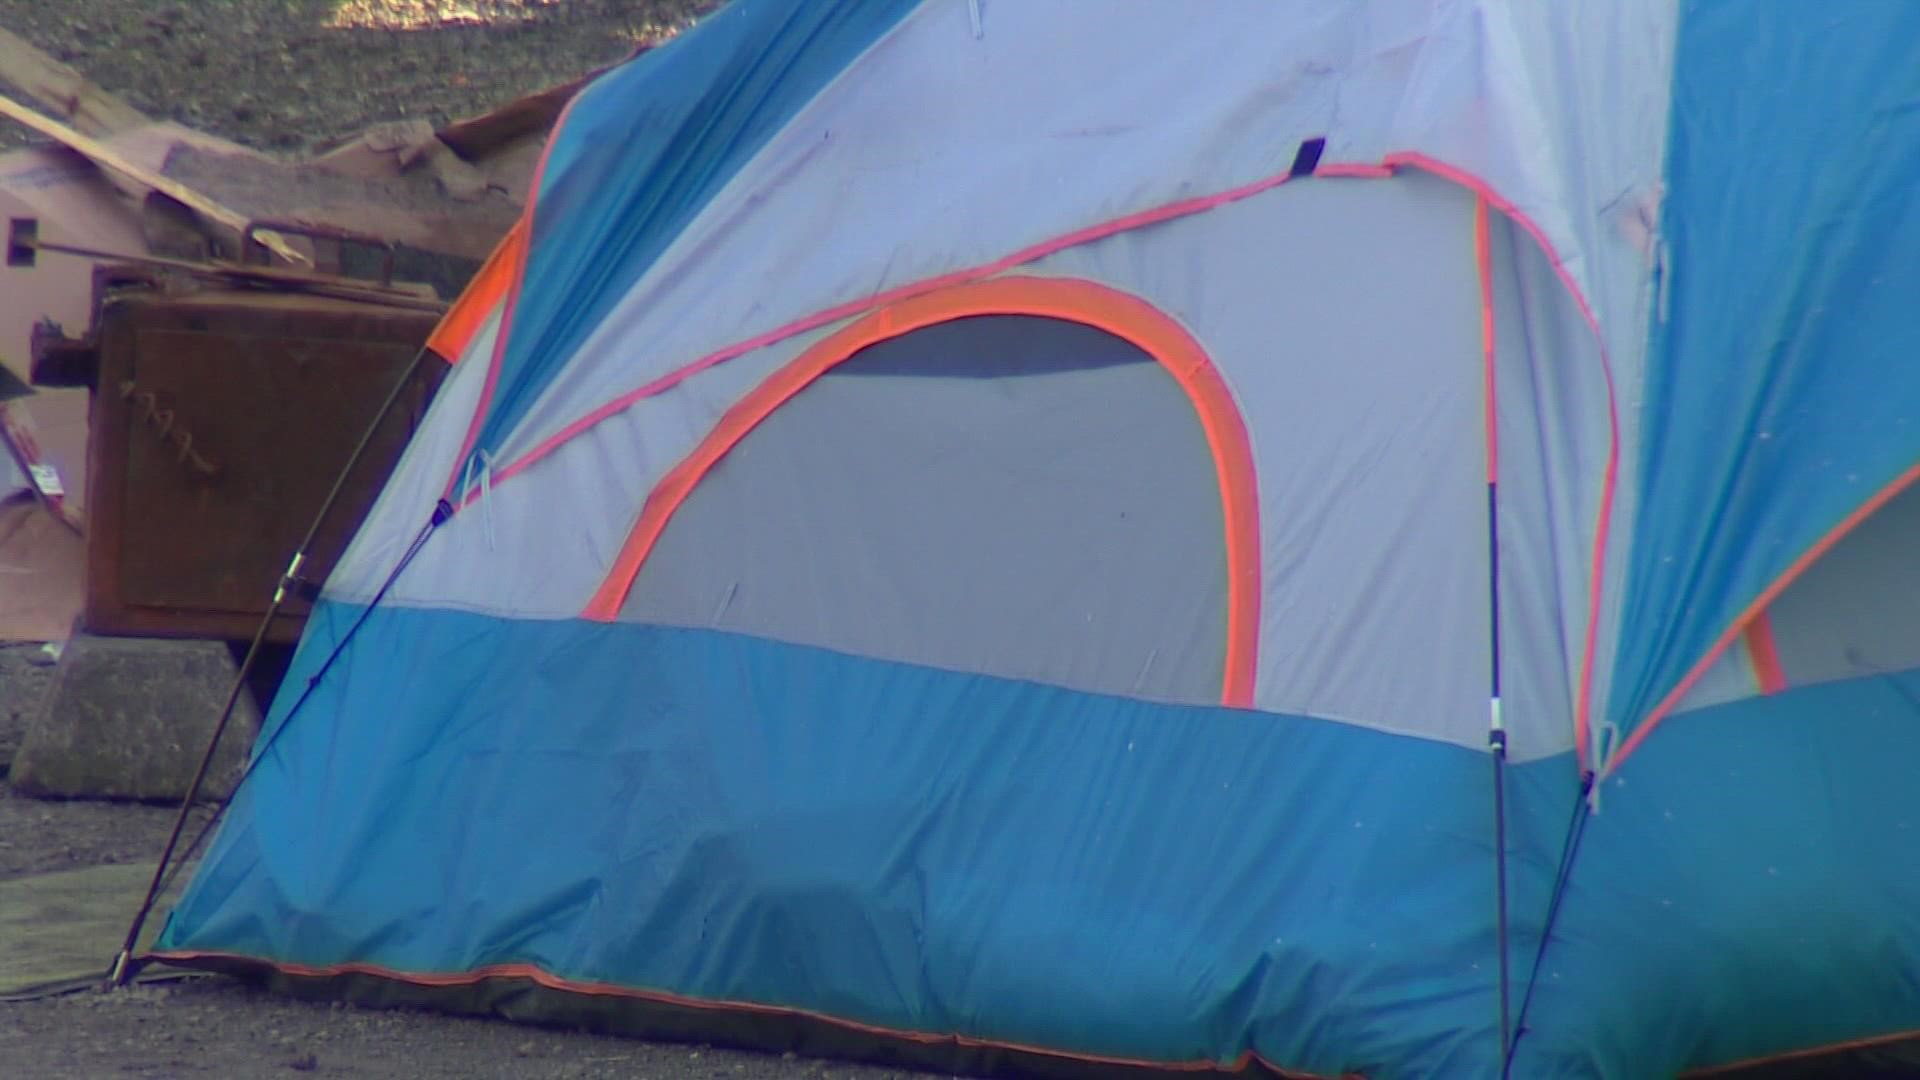 The charter amendment would require the city of Seattle to clear encampments from parks once new permanent housing and homelessness resources were in place.